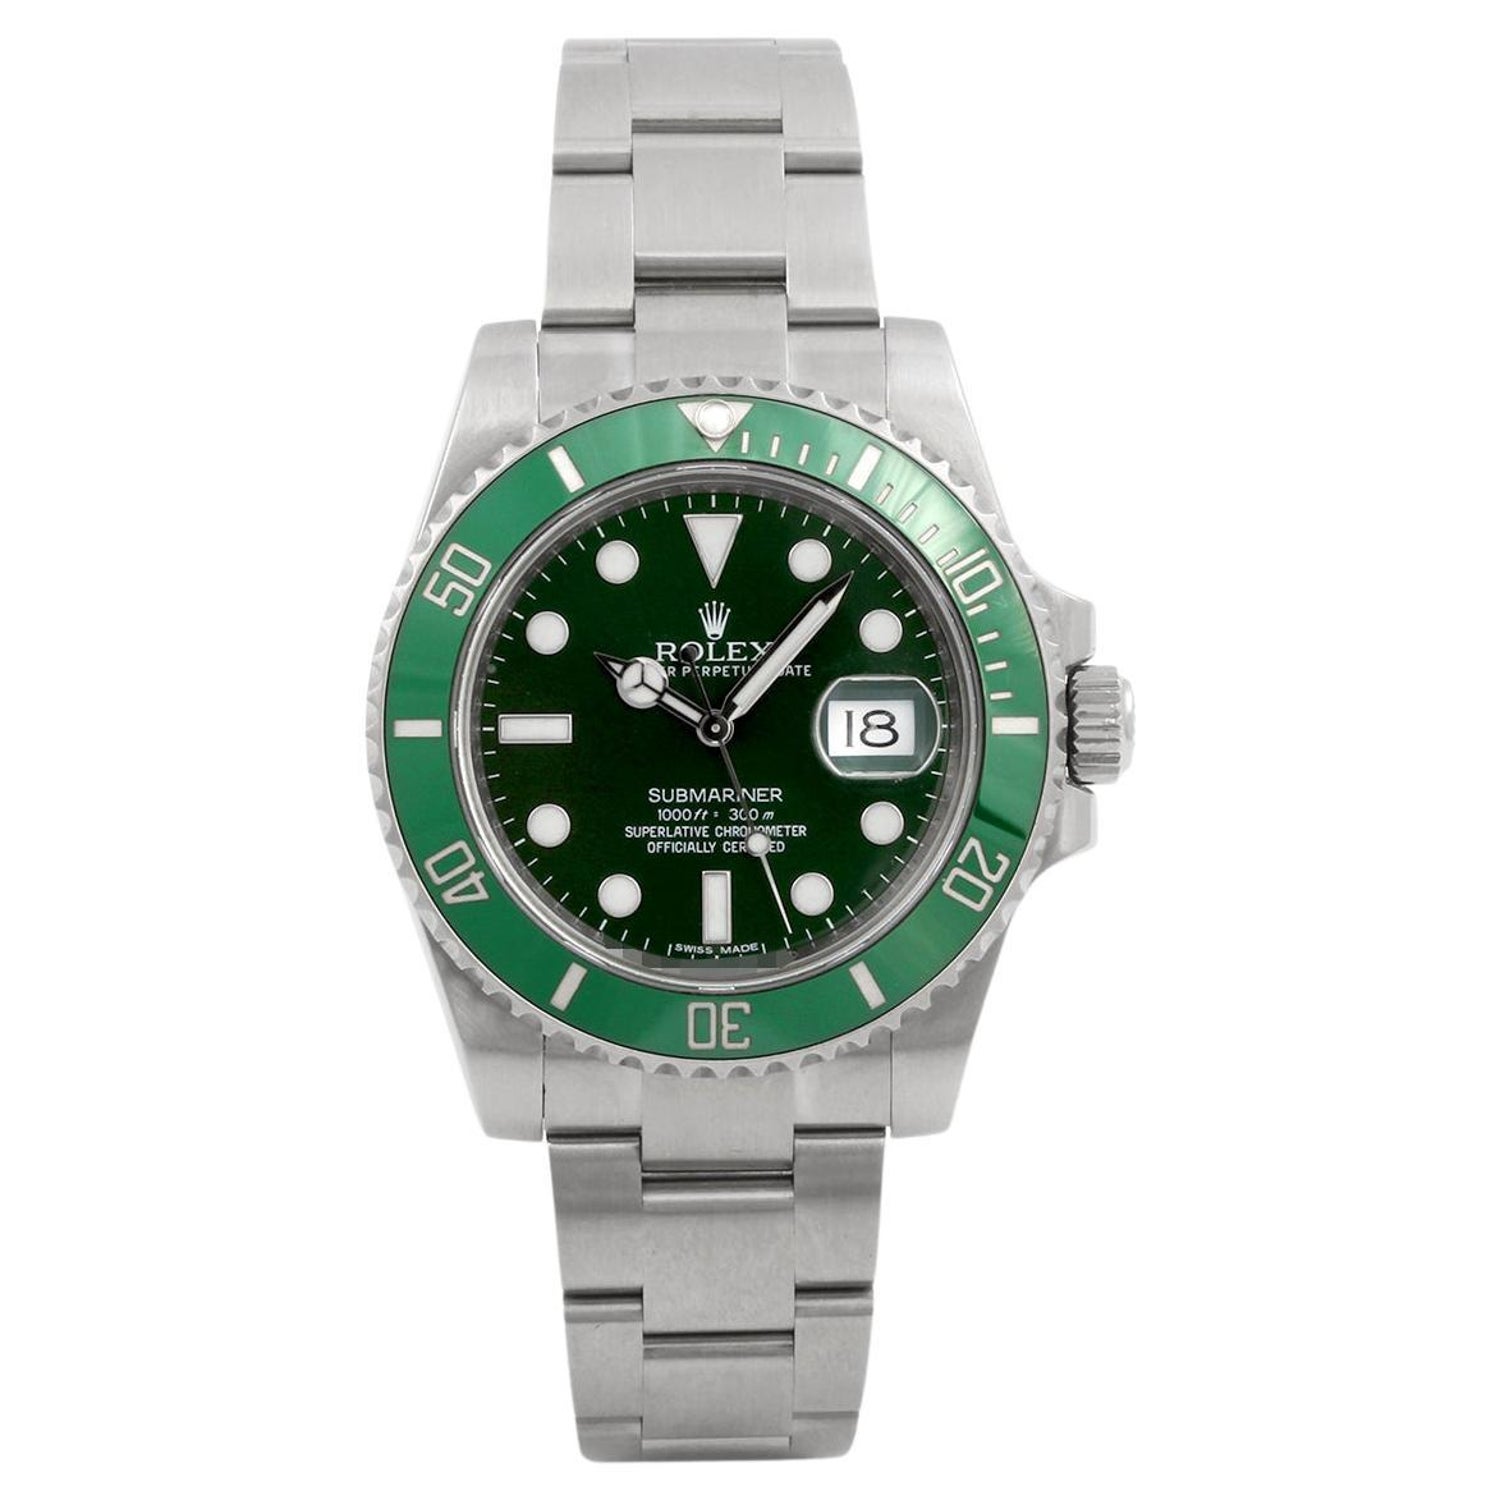 He Throws His Rolex Submariner Hulk Into the Ocean!? — Life on the Wrist